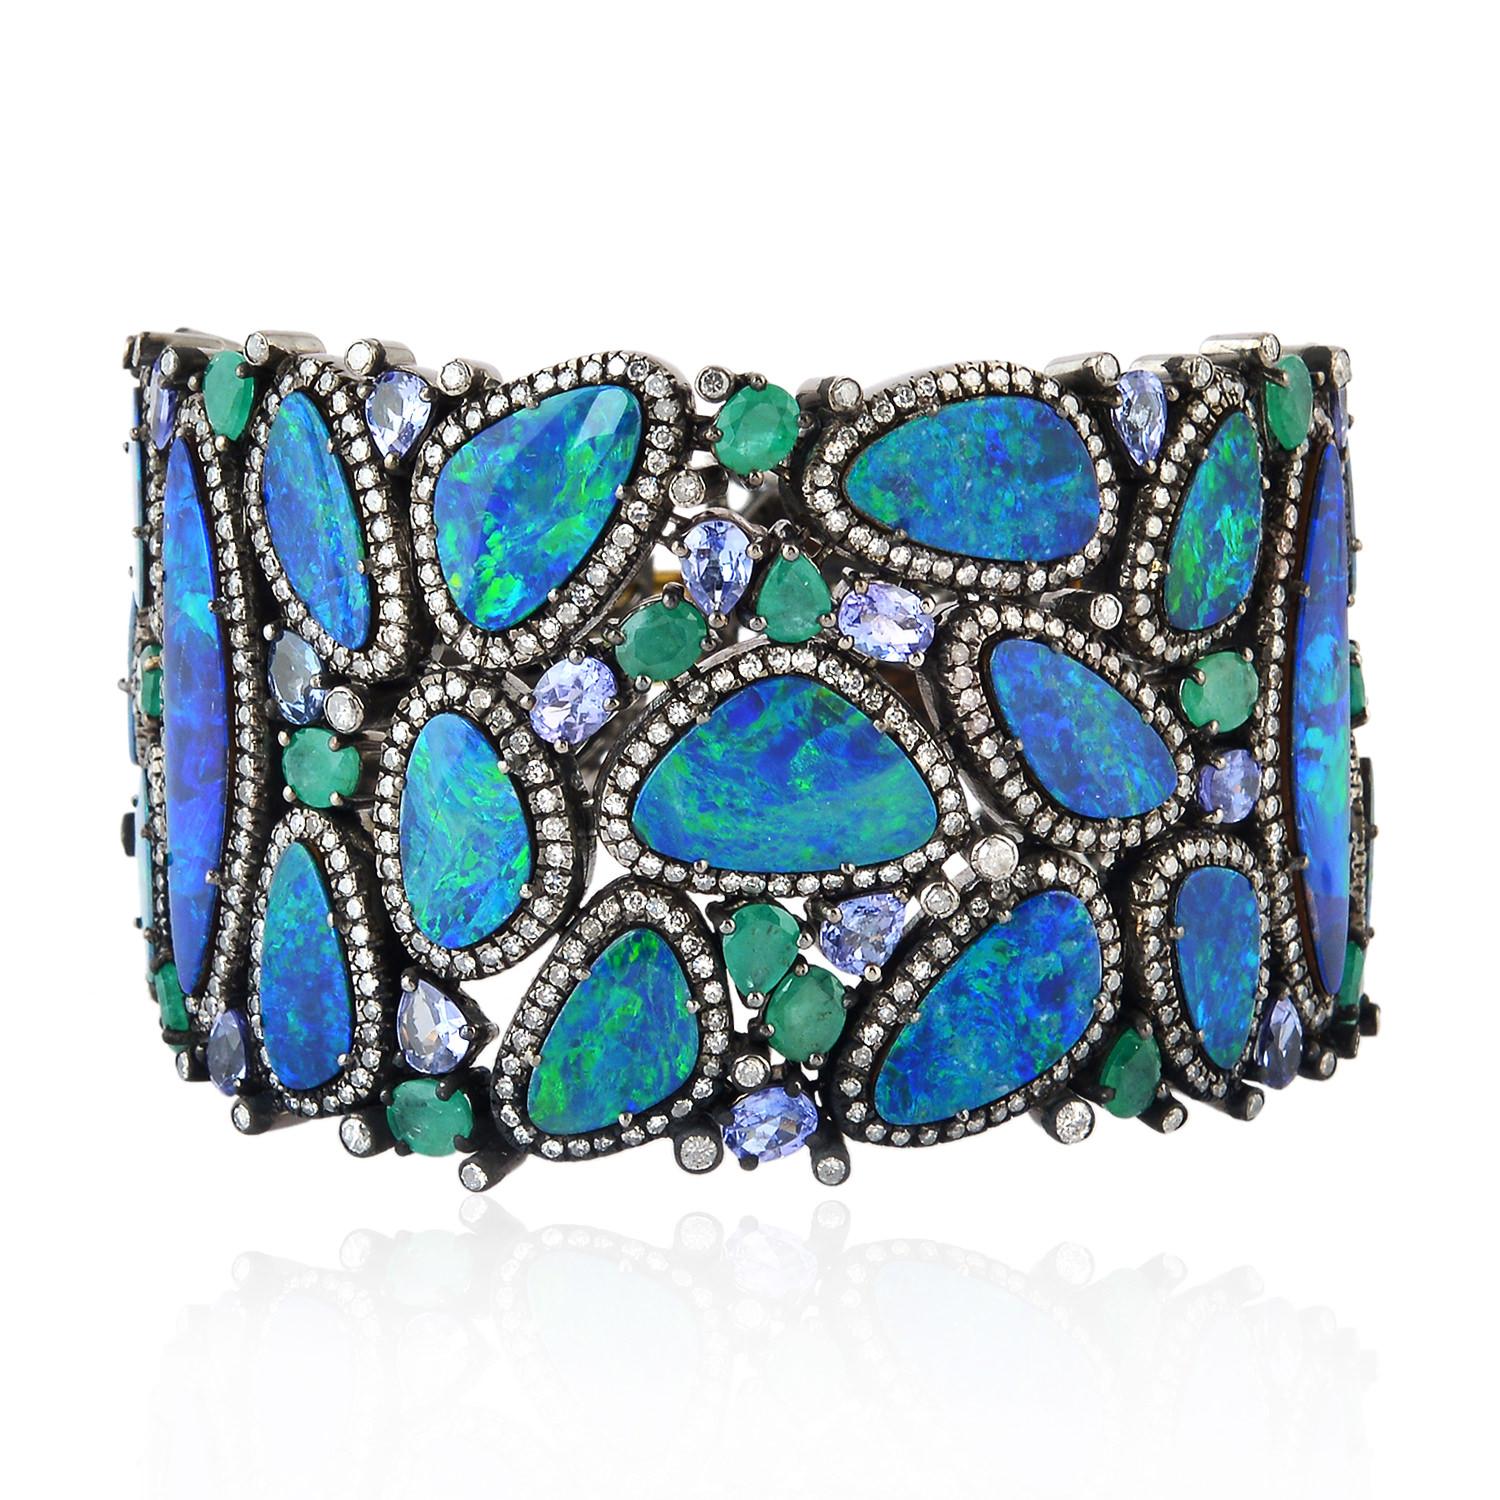 A stunning bracelet cuff is handmade in 18K gold and sterling silver. It is set in 7.97 carats emerald, 57.12 carats opal doublet, 7.42 carats tanzanite and 7.27 carats diamonds. Pair this with your favorite evening dress for a red carpet look.